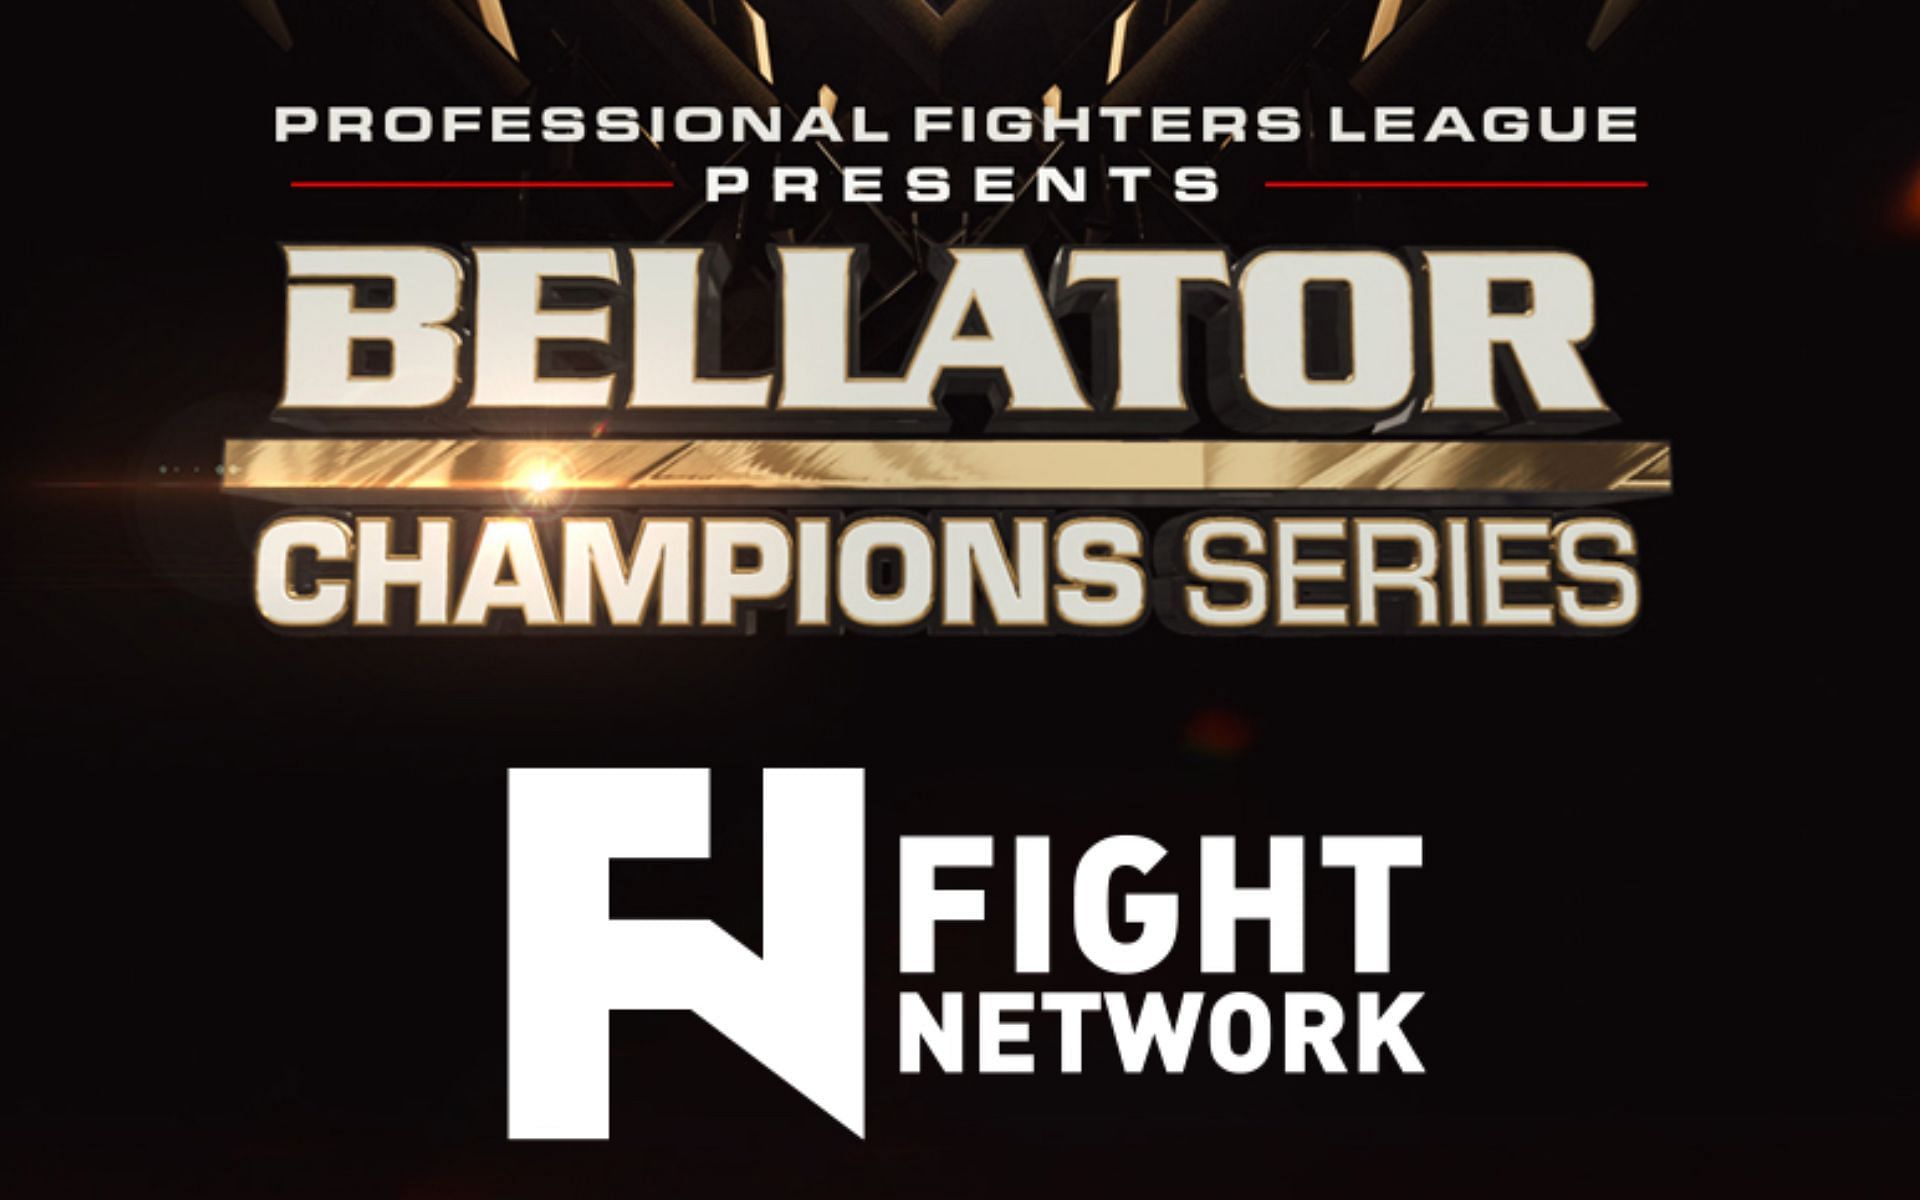 Where can Canadian fans watch Bellator Champions Series? [Image courtesy: @fightnet - X]